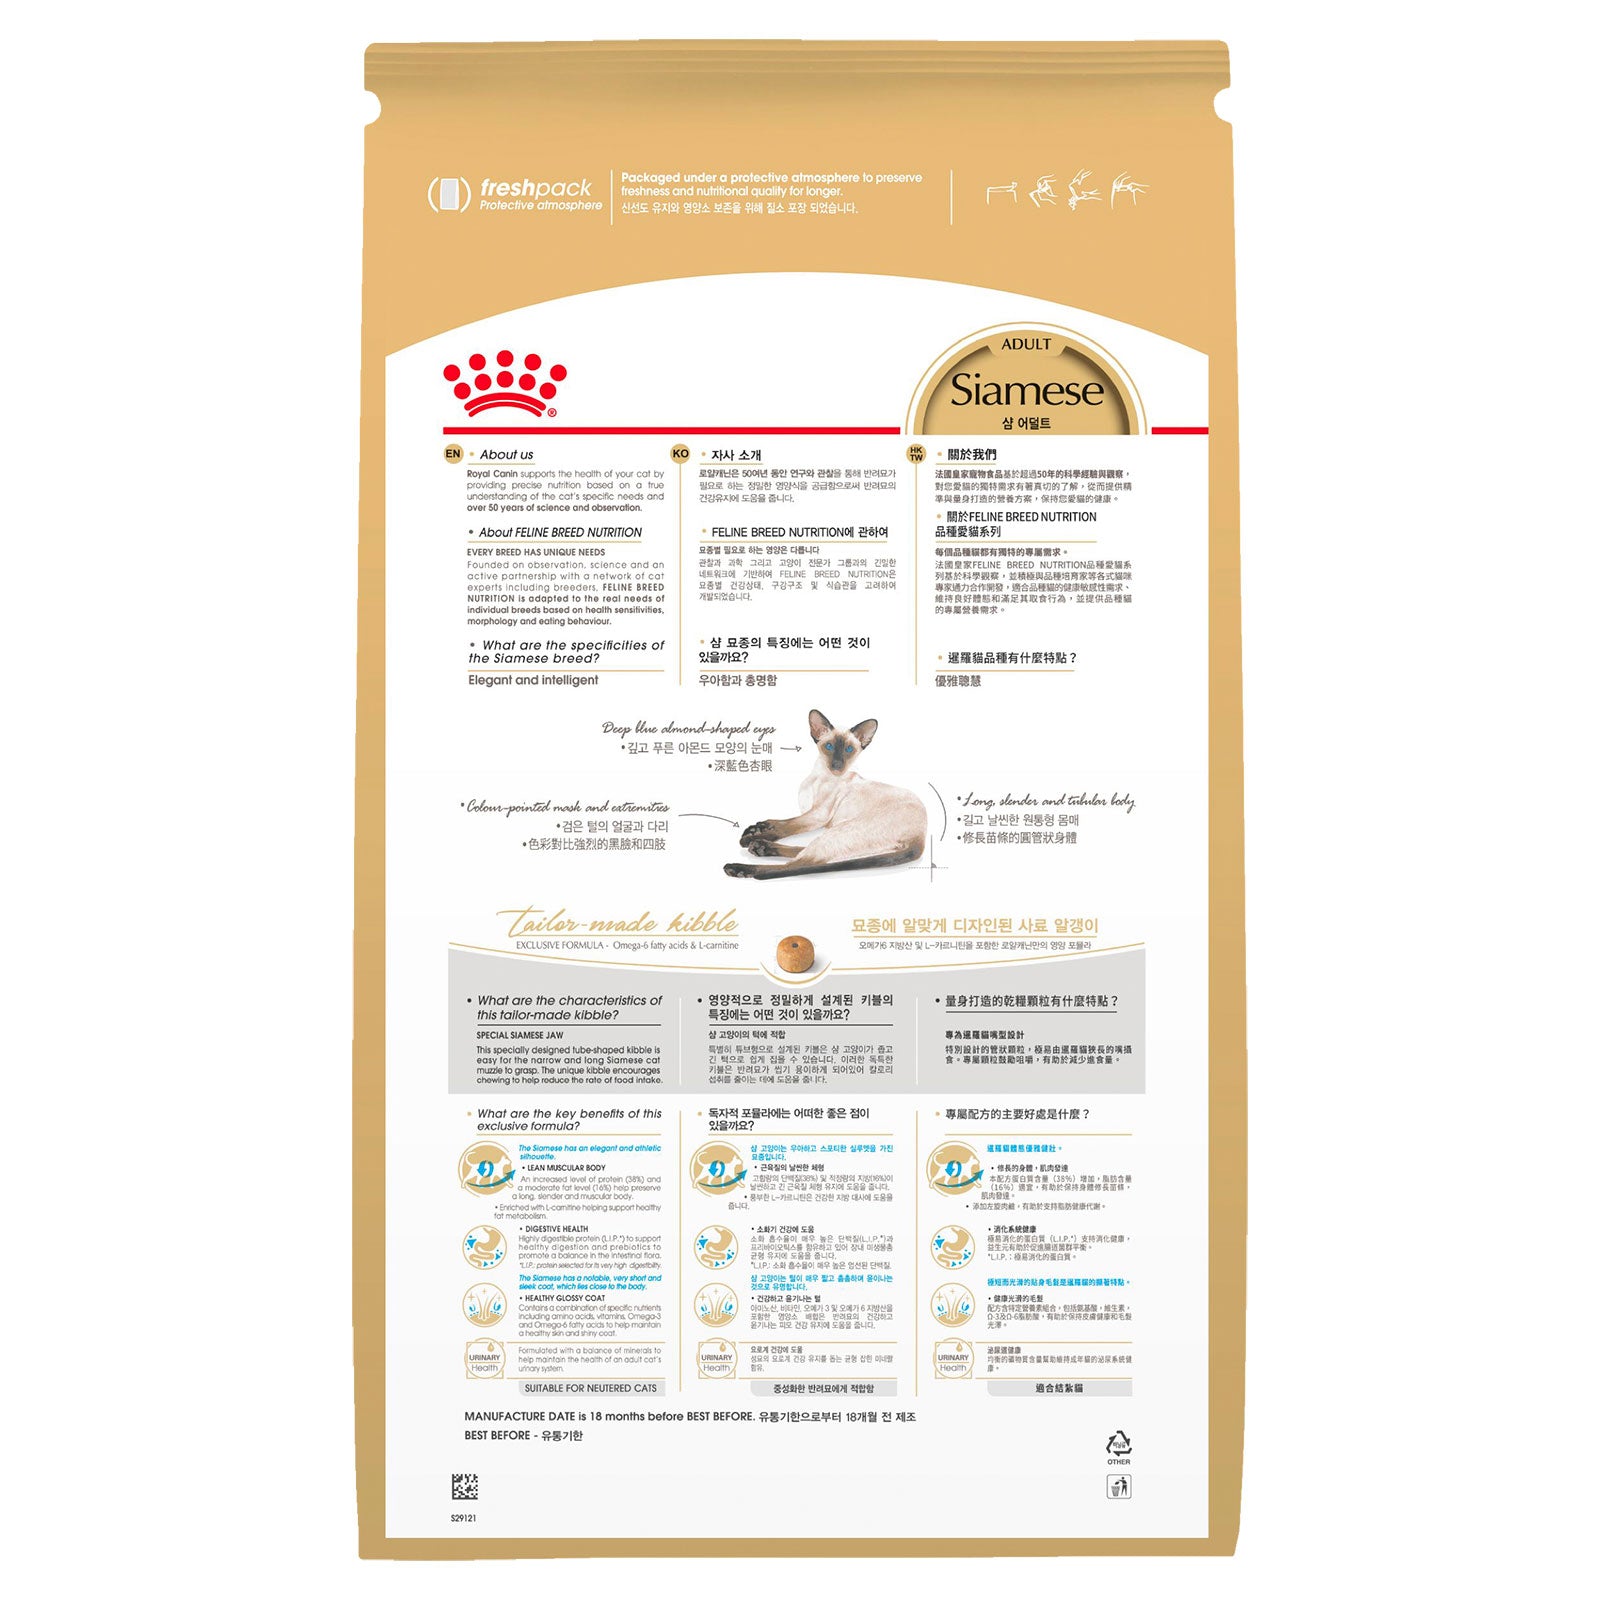 Royal Canin Cat Food Adult Siamese